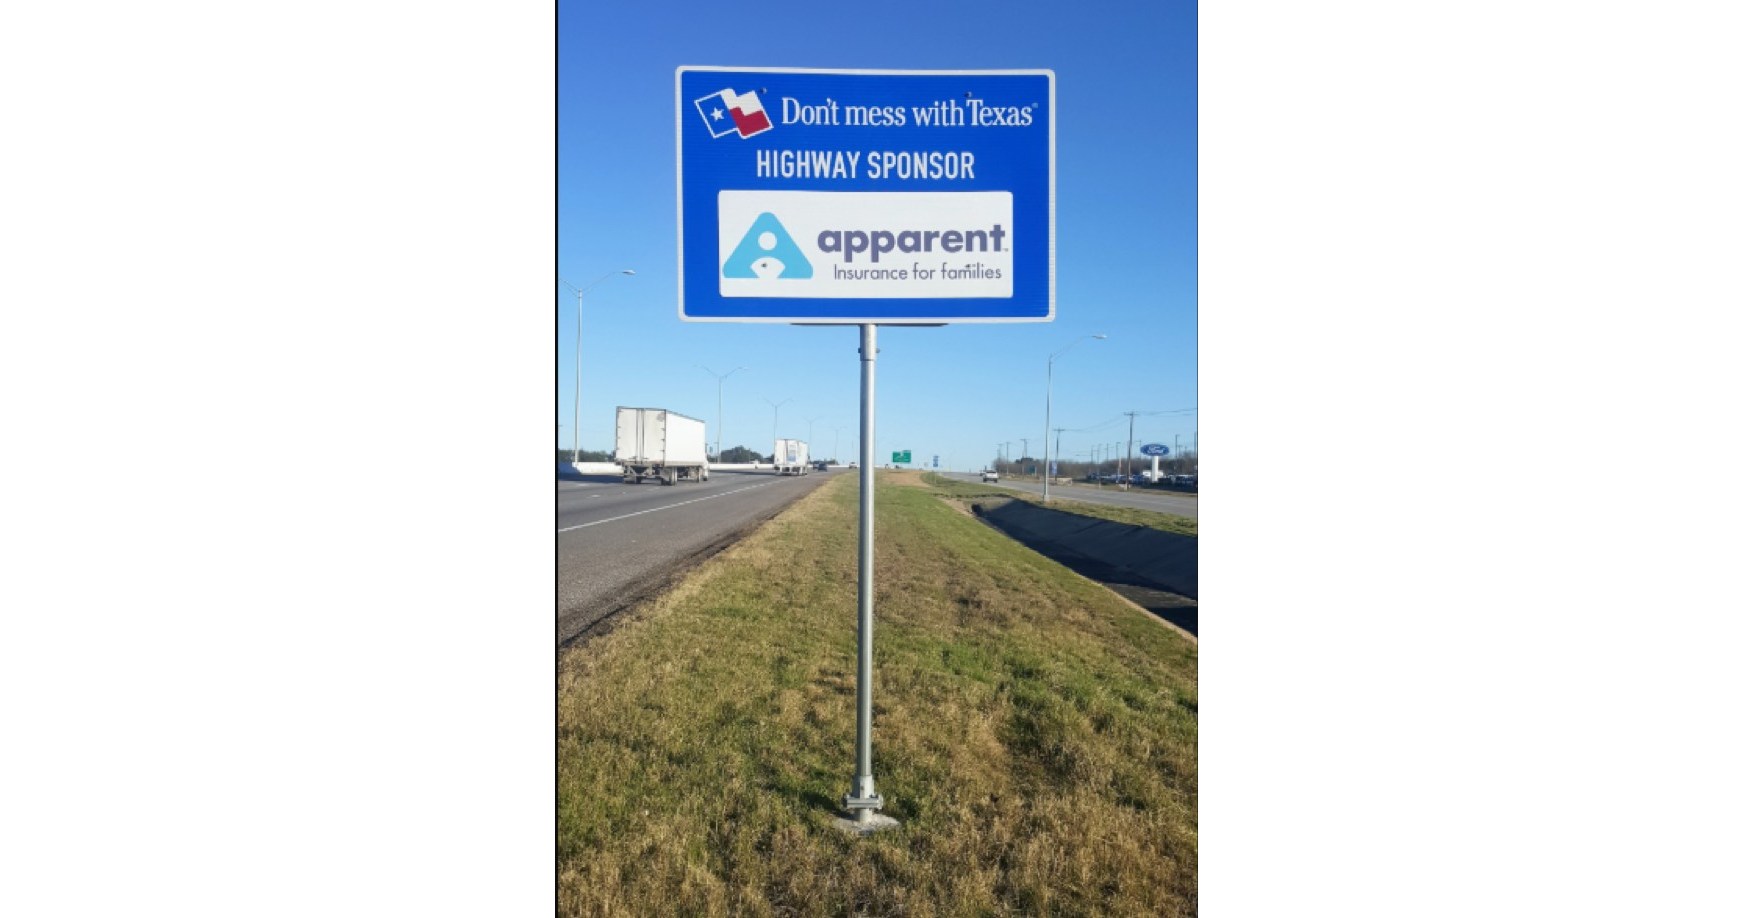 Apparent Insurance Is Keeping Texas Highways Safe And Clean in